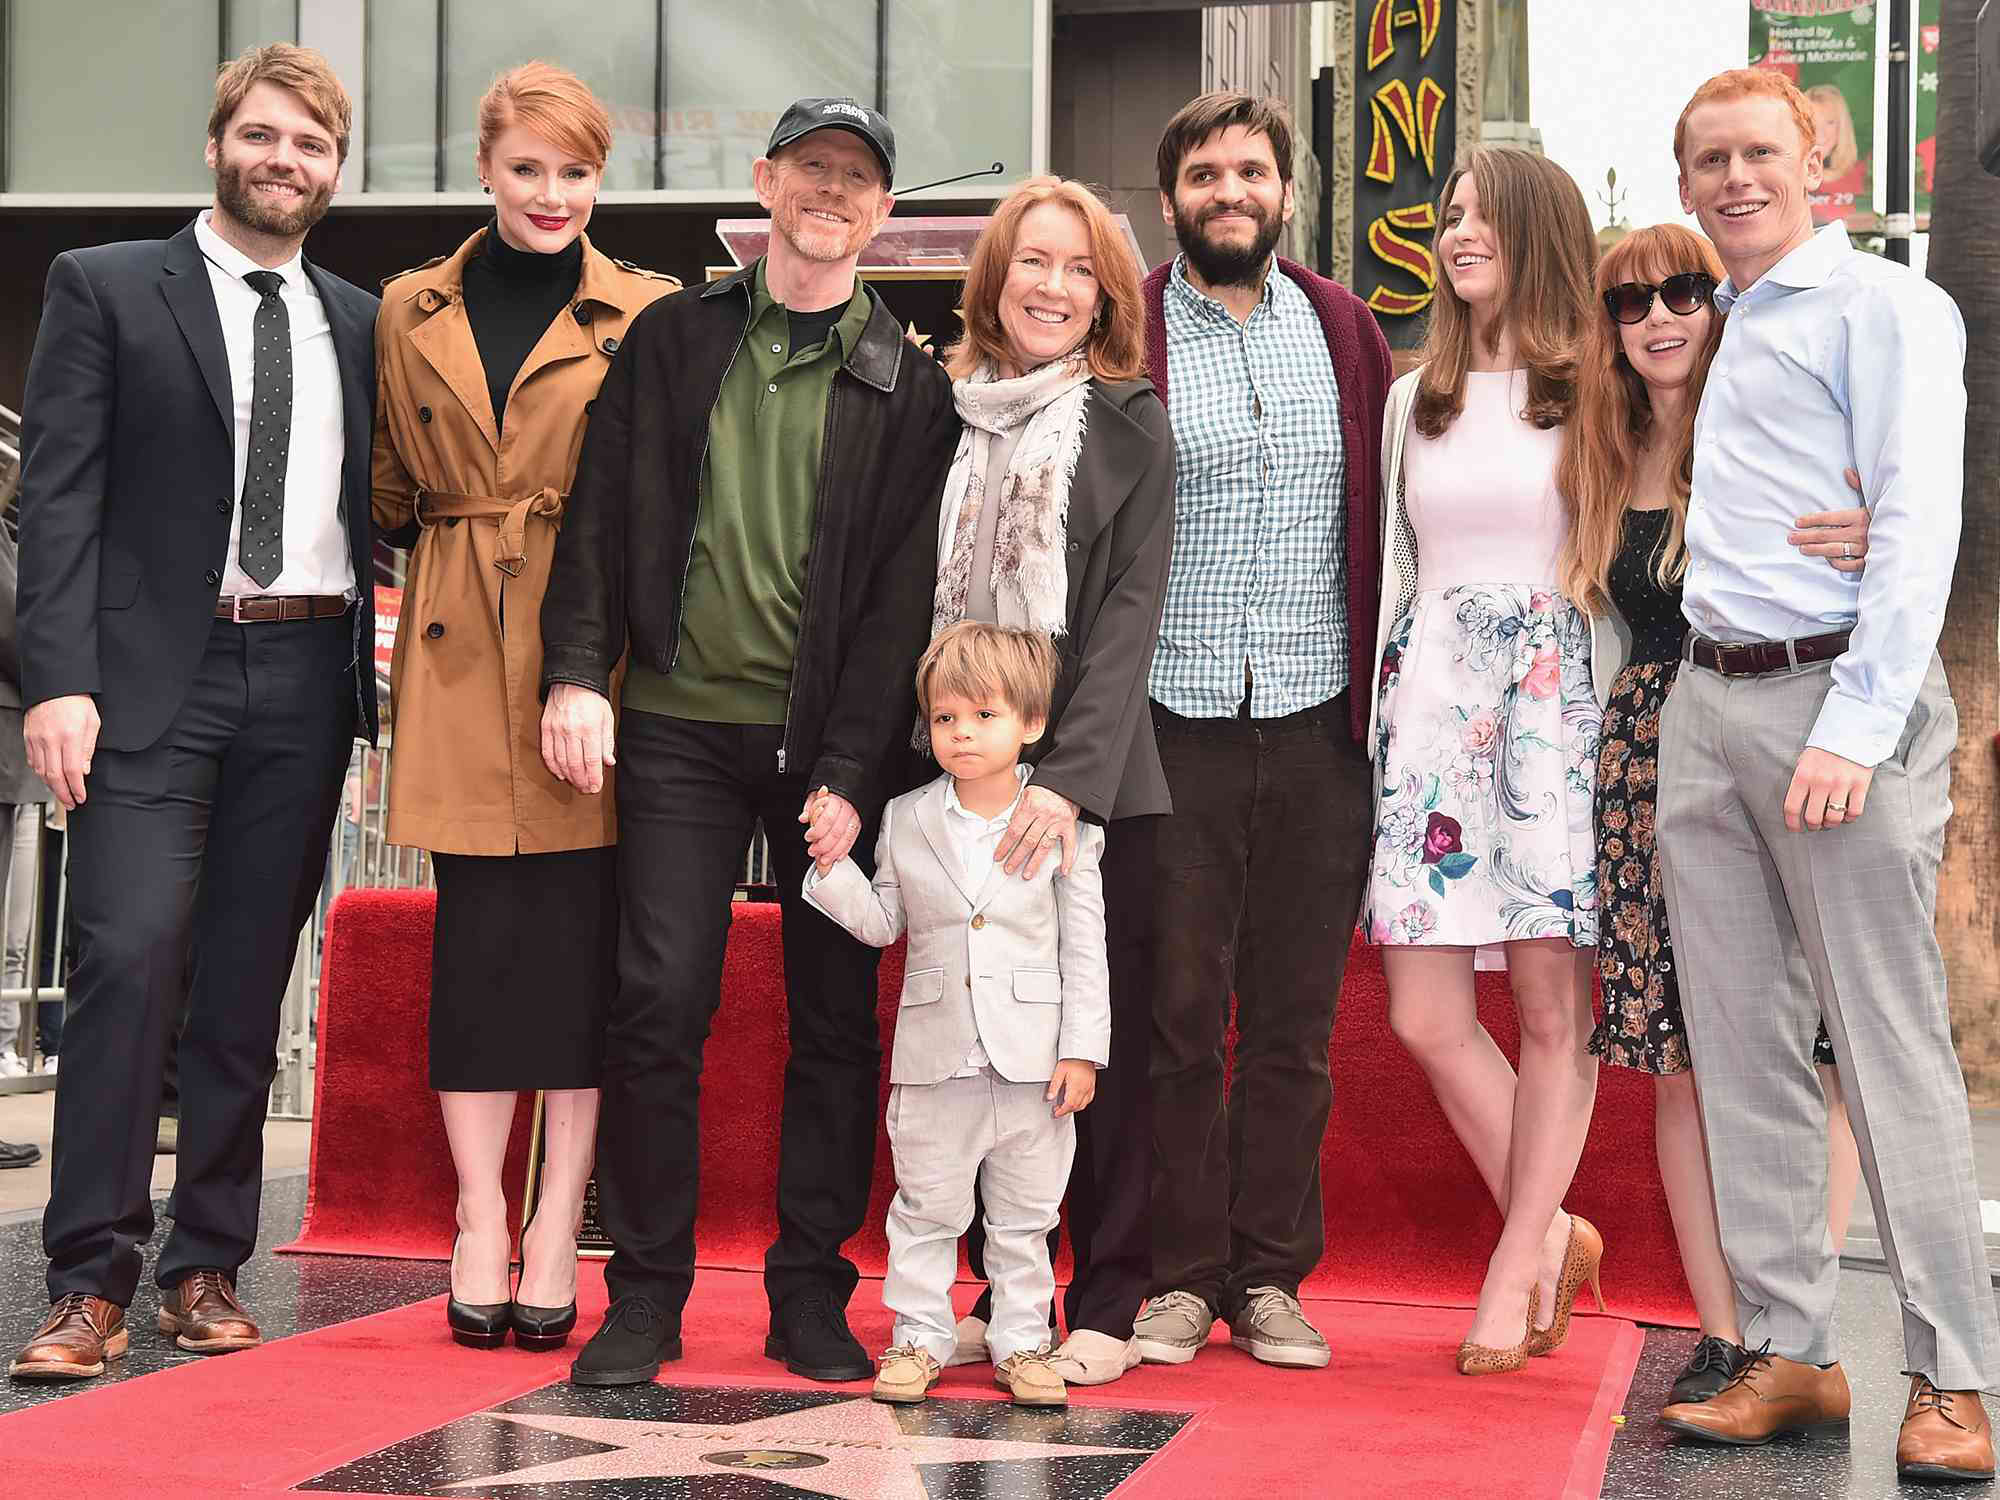 Ron Howard's 4 Children: All About Bryce, Paige, Jocelyn and Reed